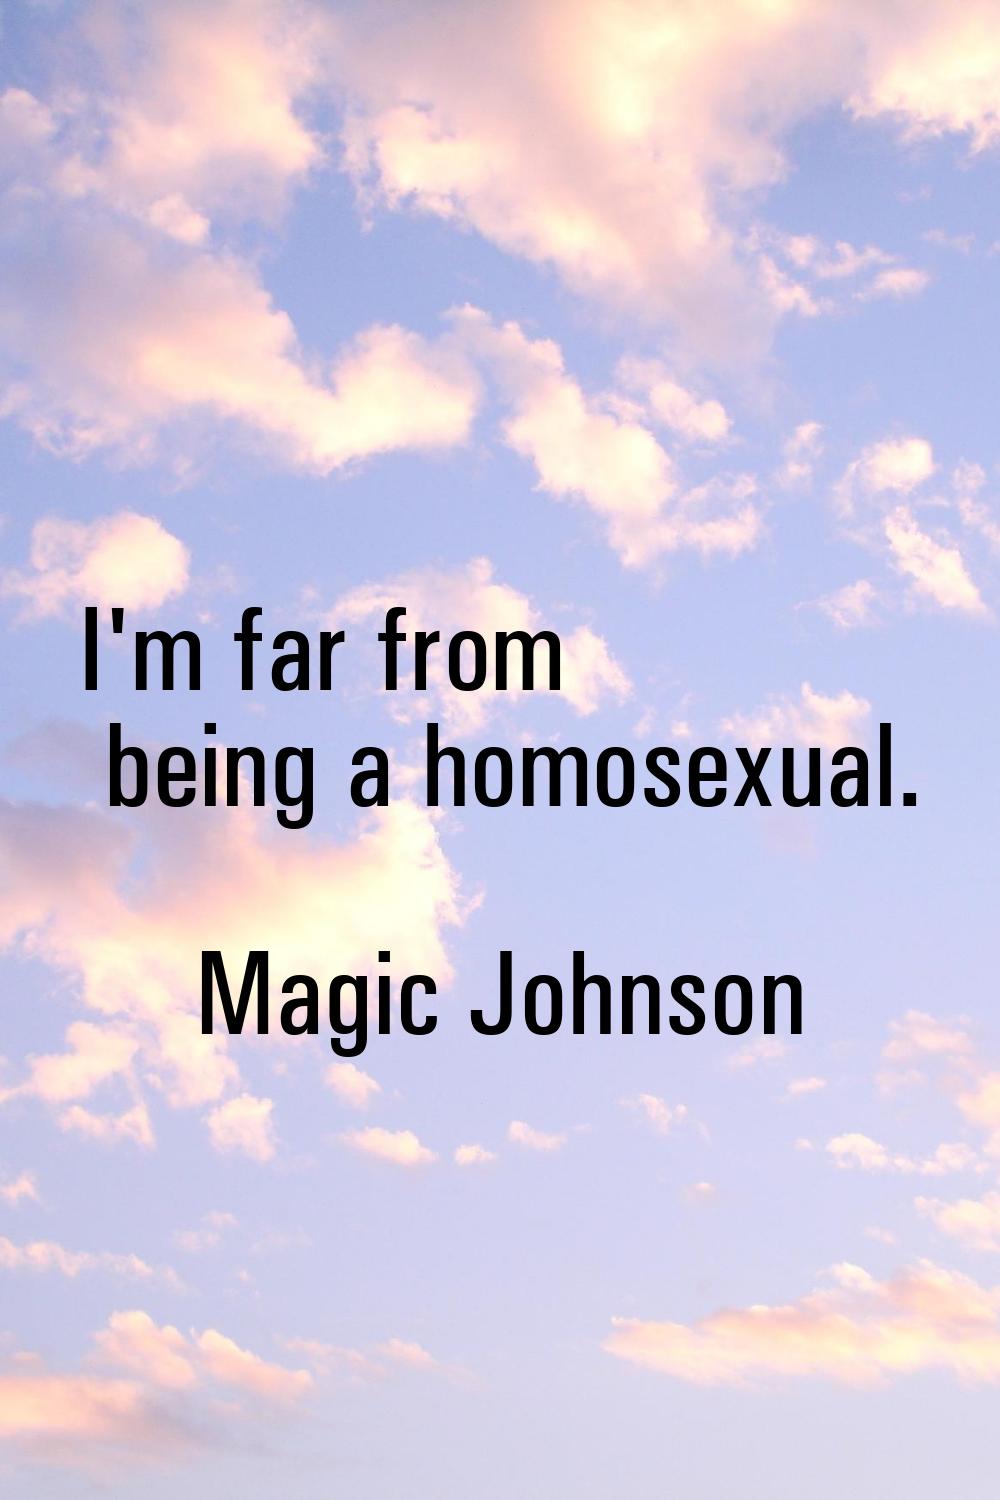 I'm far from being a homosexual.